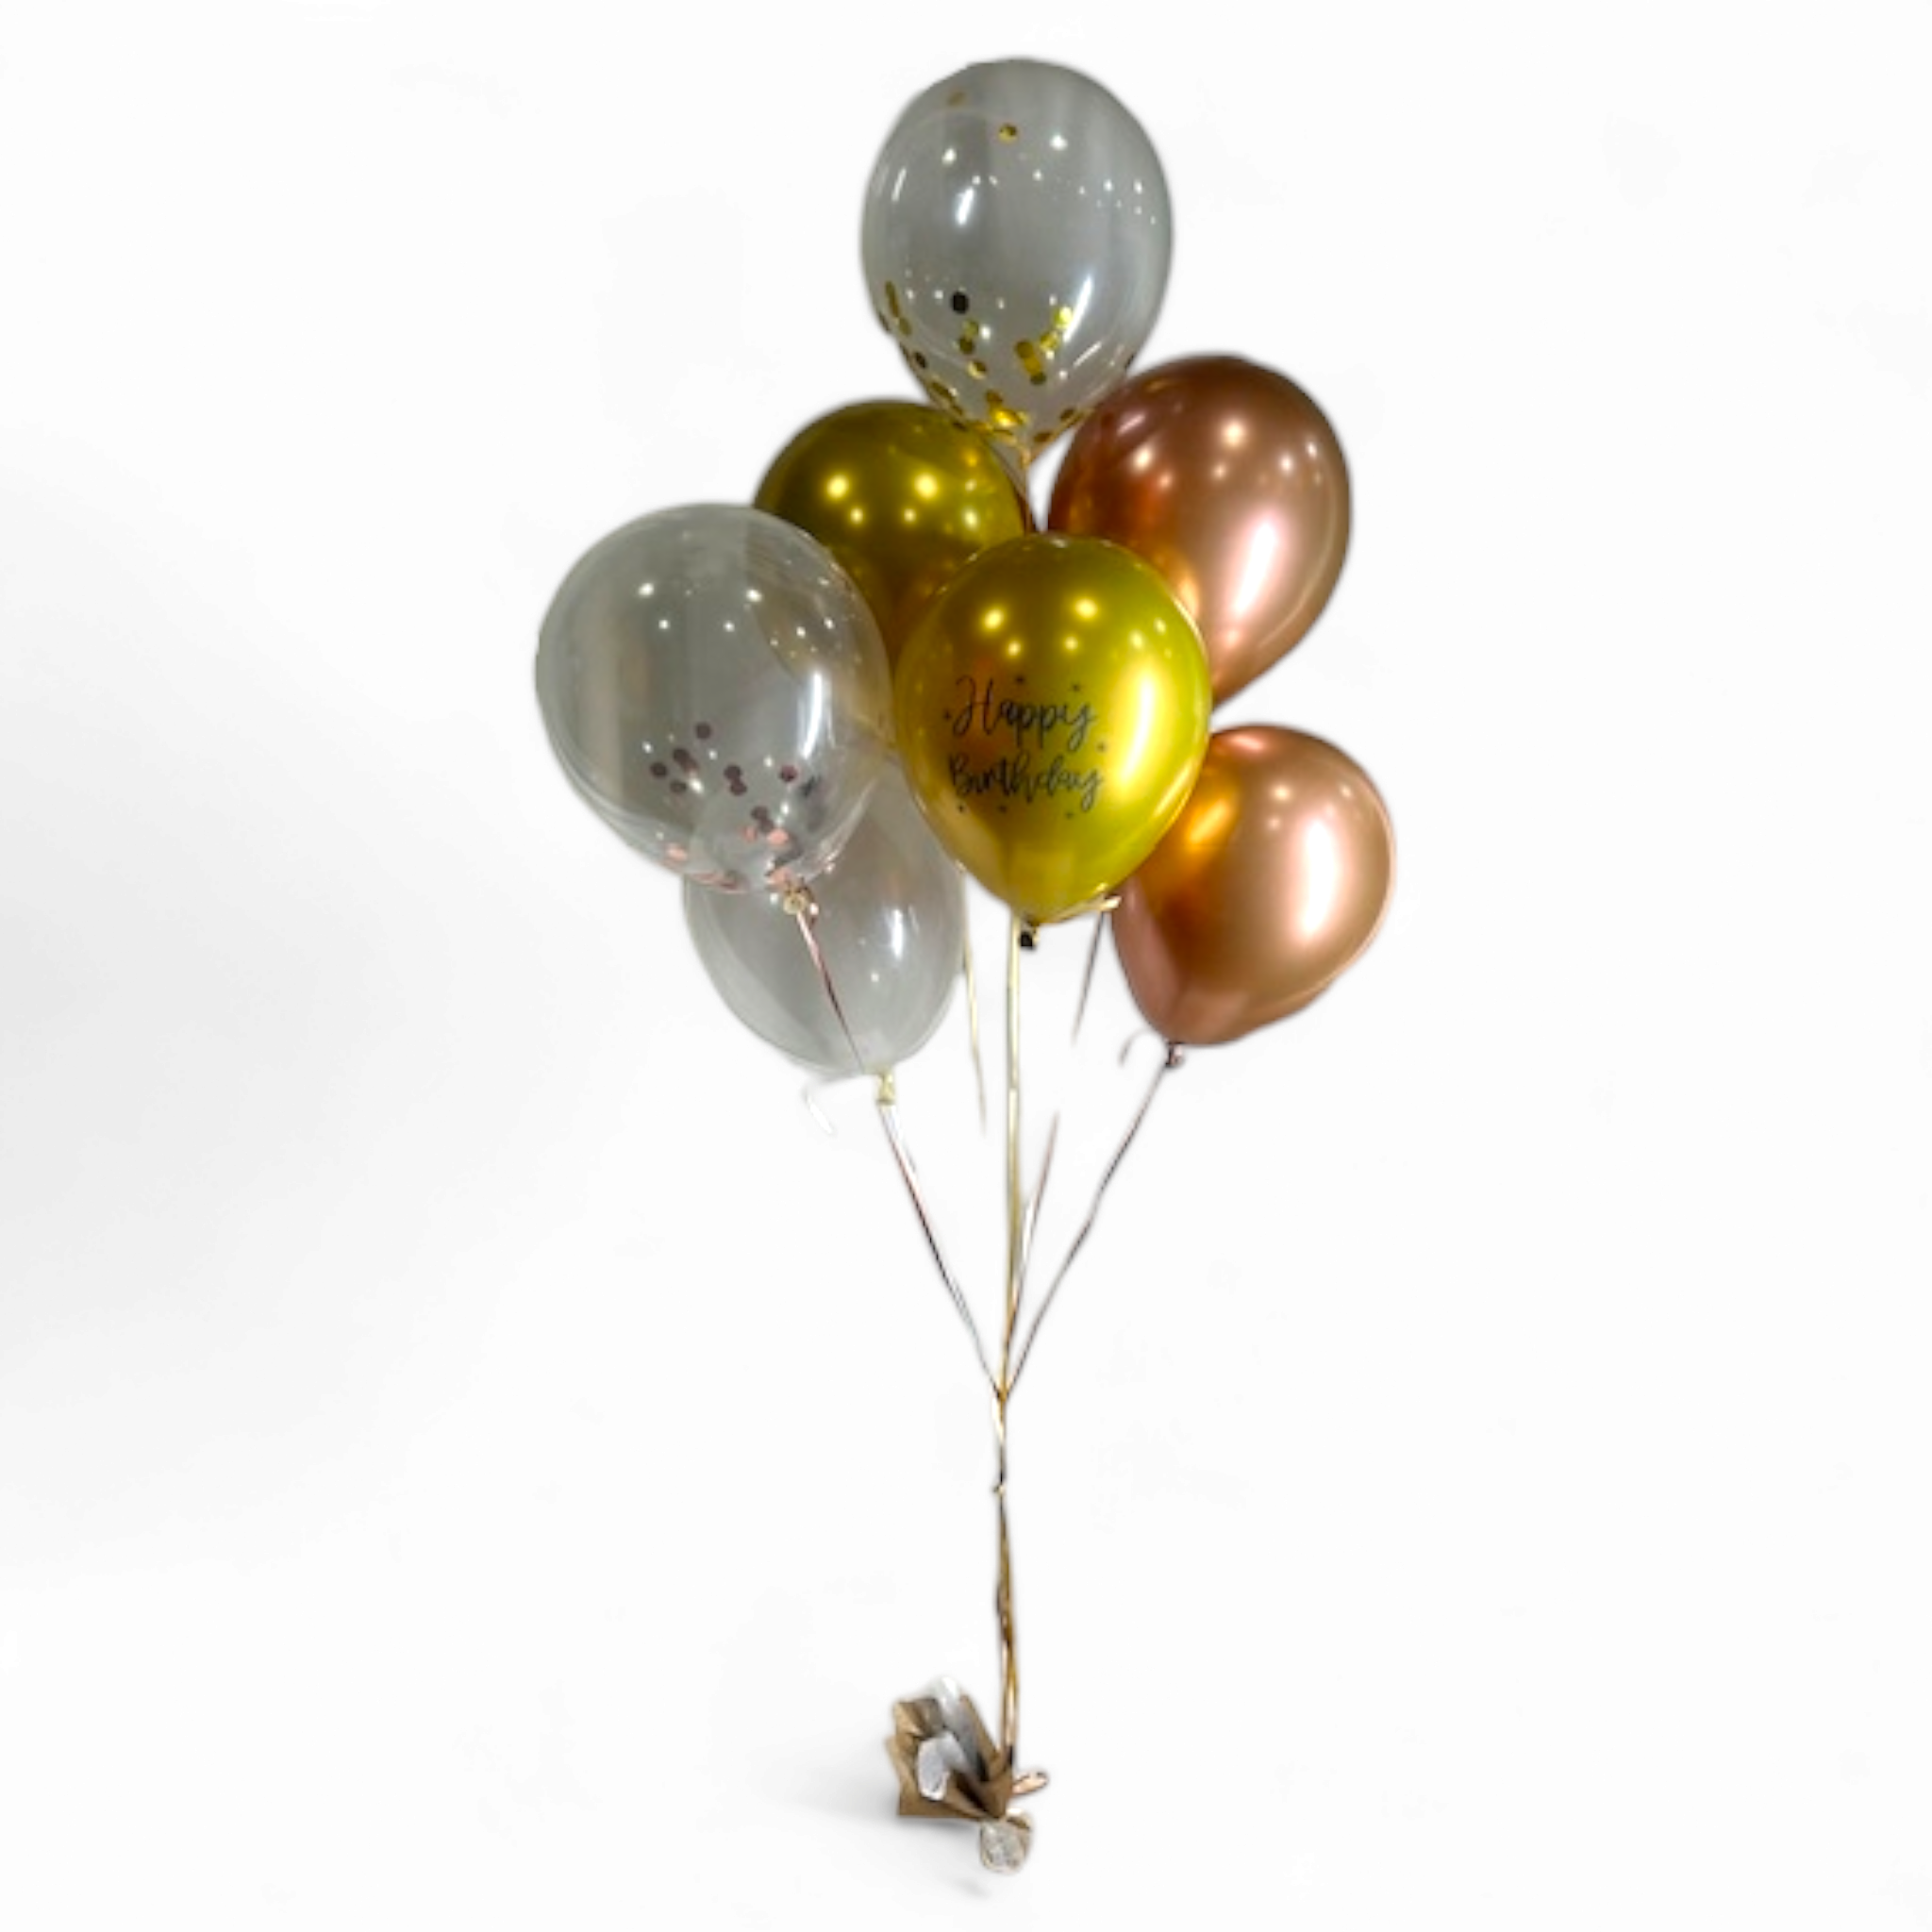 Rose-Gold-and-Gold-HappyBirthday-balloonbouquet